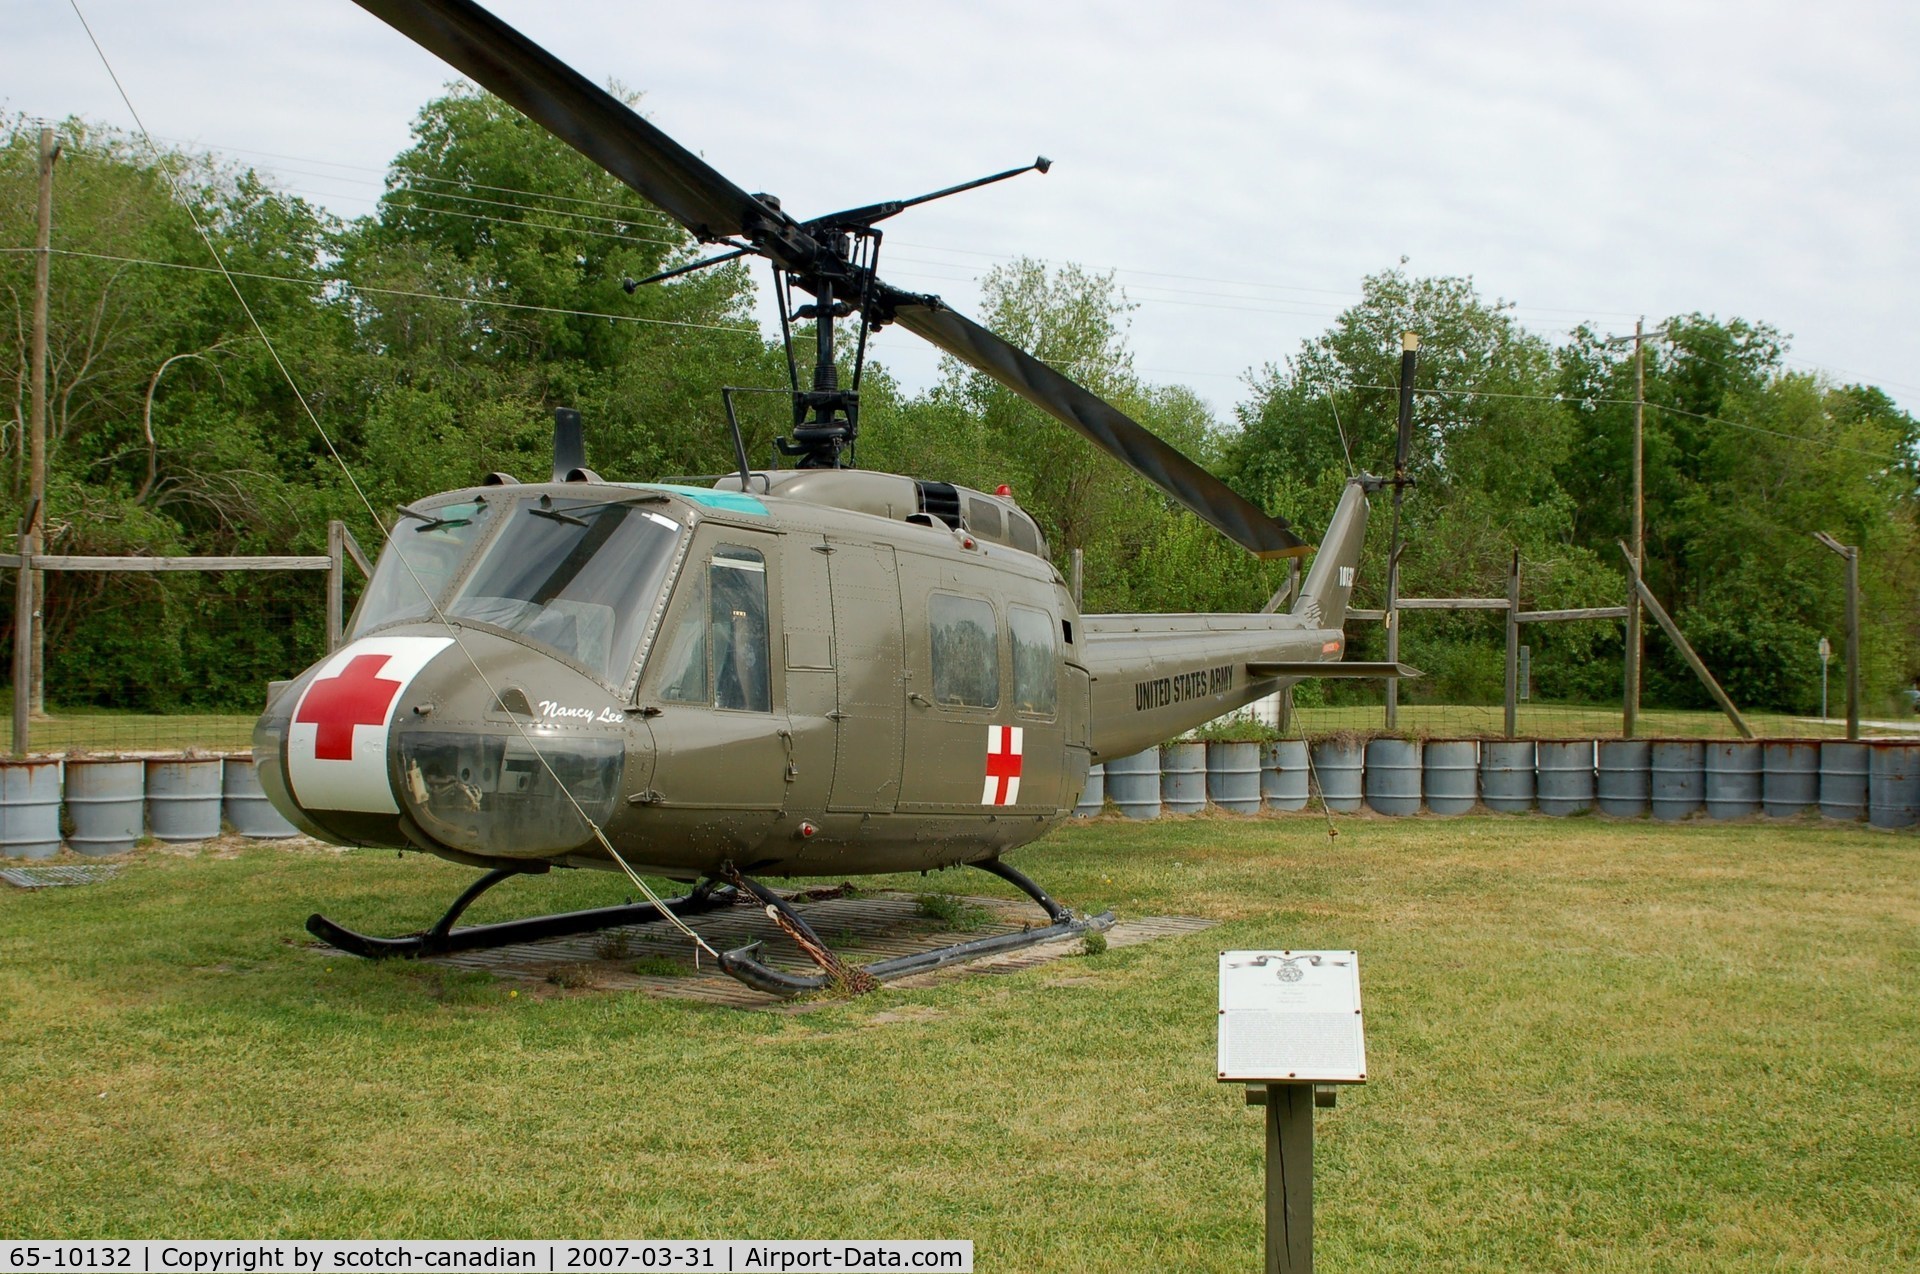 65-10132, 1965 Bell UH-1D Iroquois C/N 5176, Bell UH-1 Huey at Patriots Point Naval & Maritime Museum, Mount Pleasant, SC